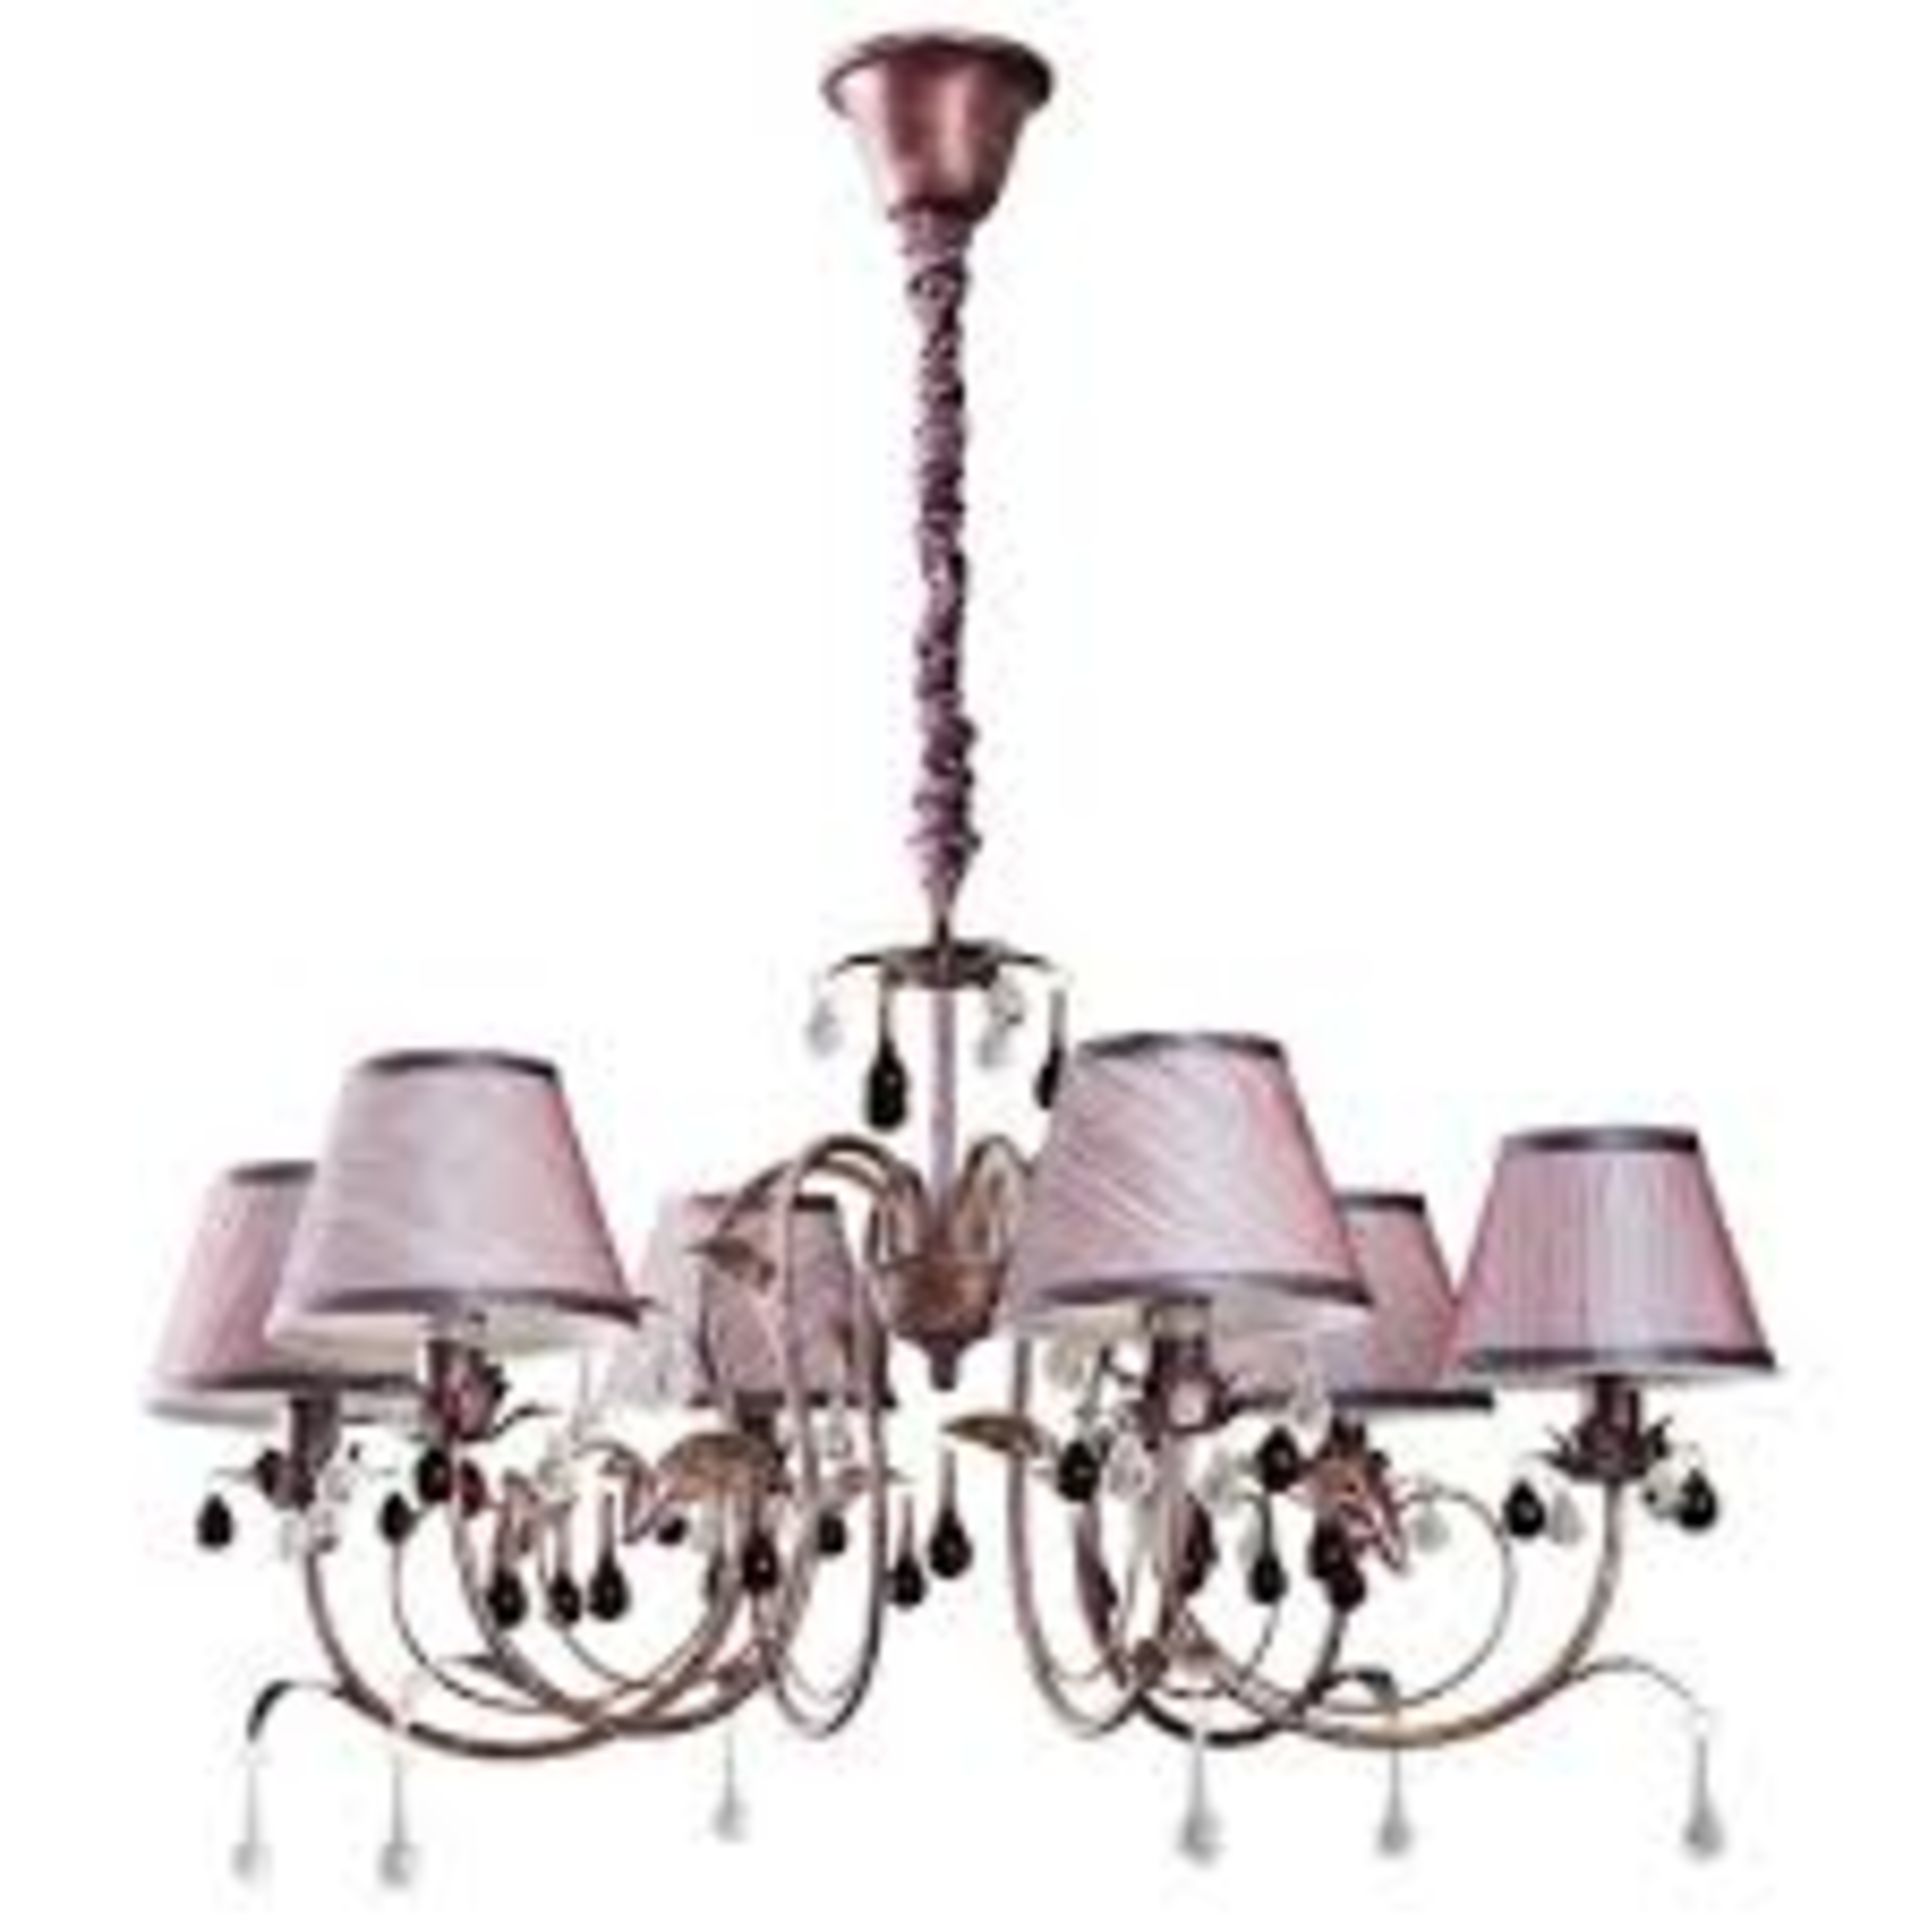 Boxed Elegance 6 Light Shaded Chandelier RRP £65 (10128)(HEC08858)